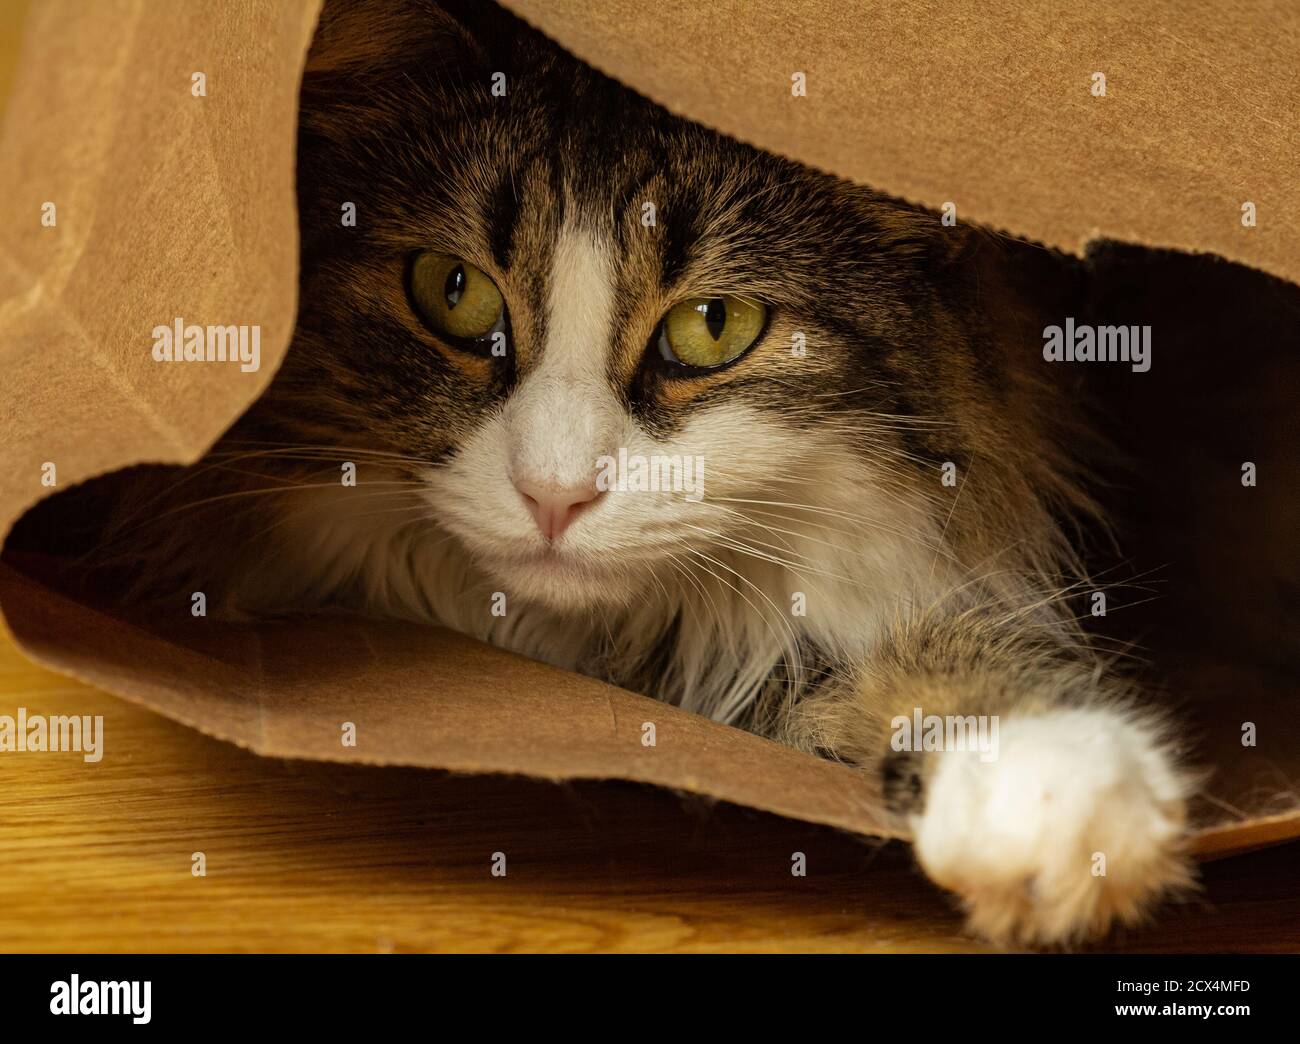 Closeup of a young domestic longhair tabby cat playing hide in seek in a brown paper bag on a wooden floor. Stock Photo